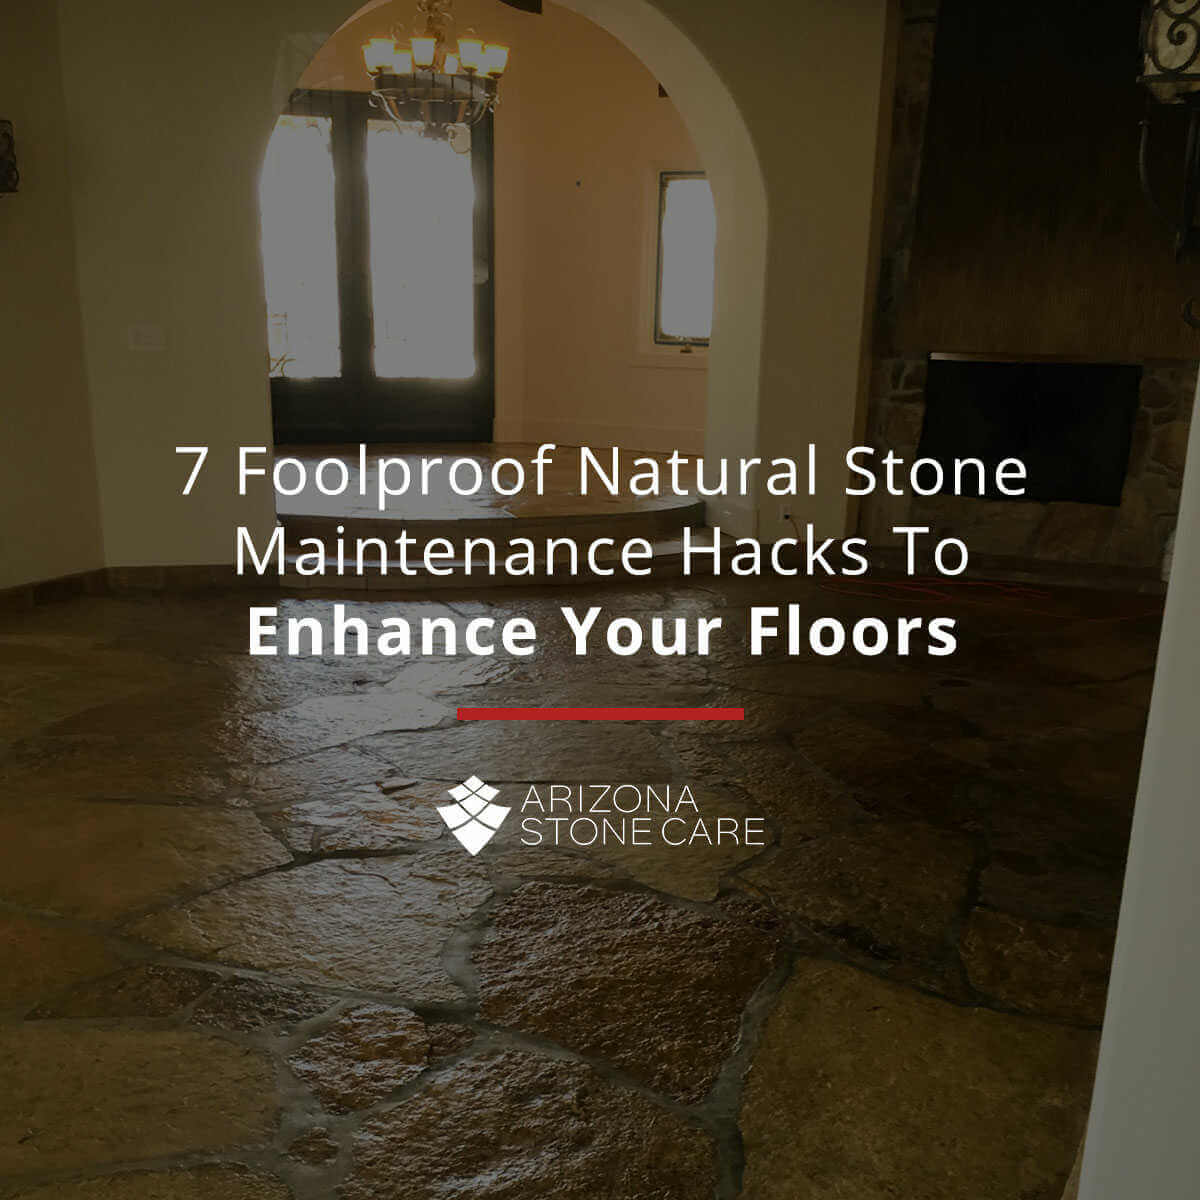 7 Foolproof Natural Stone Maintenance Hacks To Enhance Your Floors